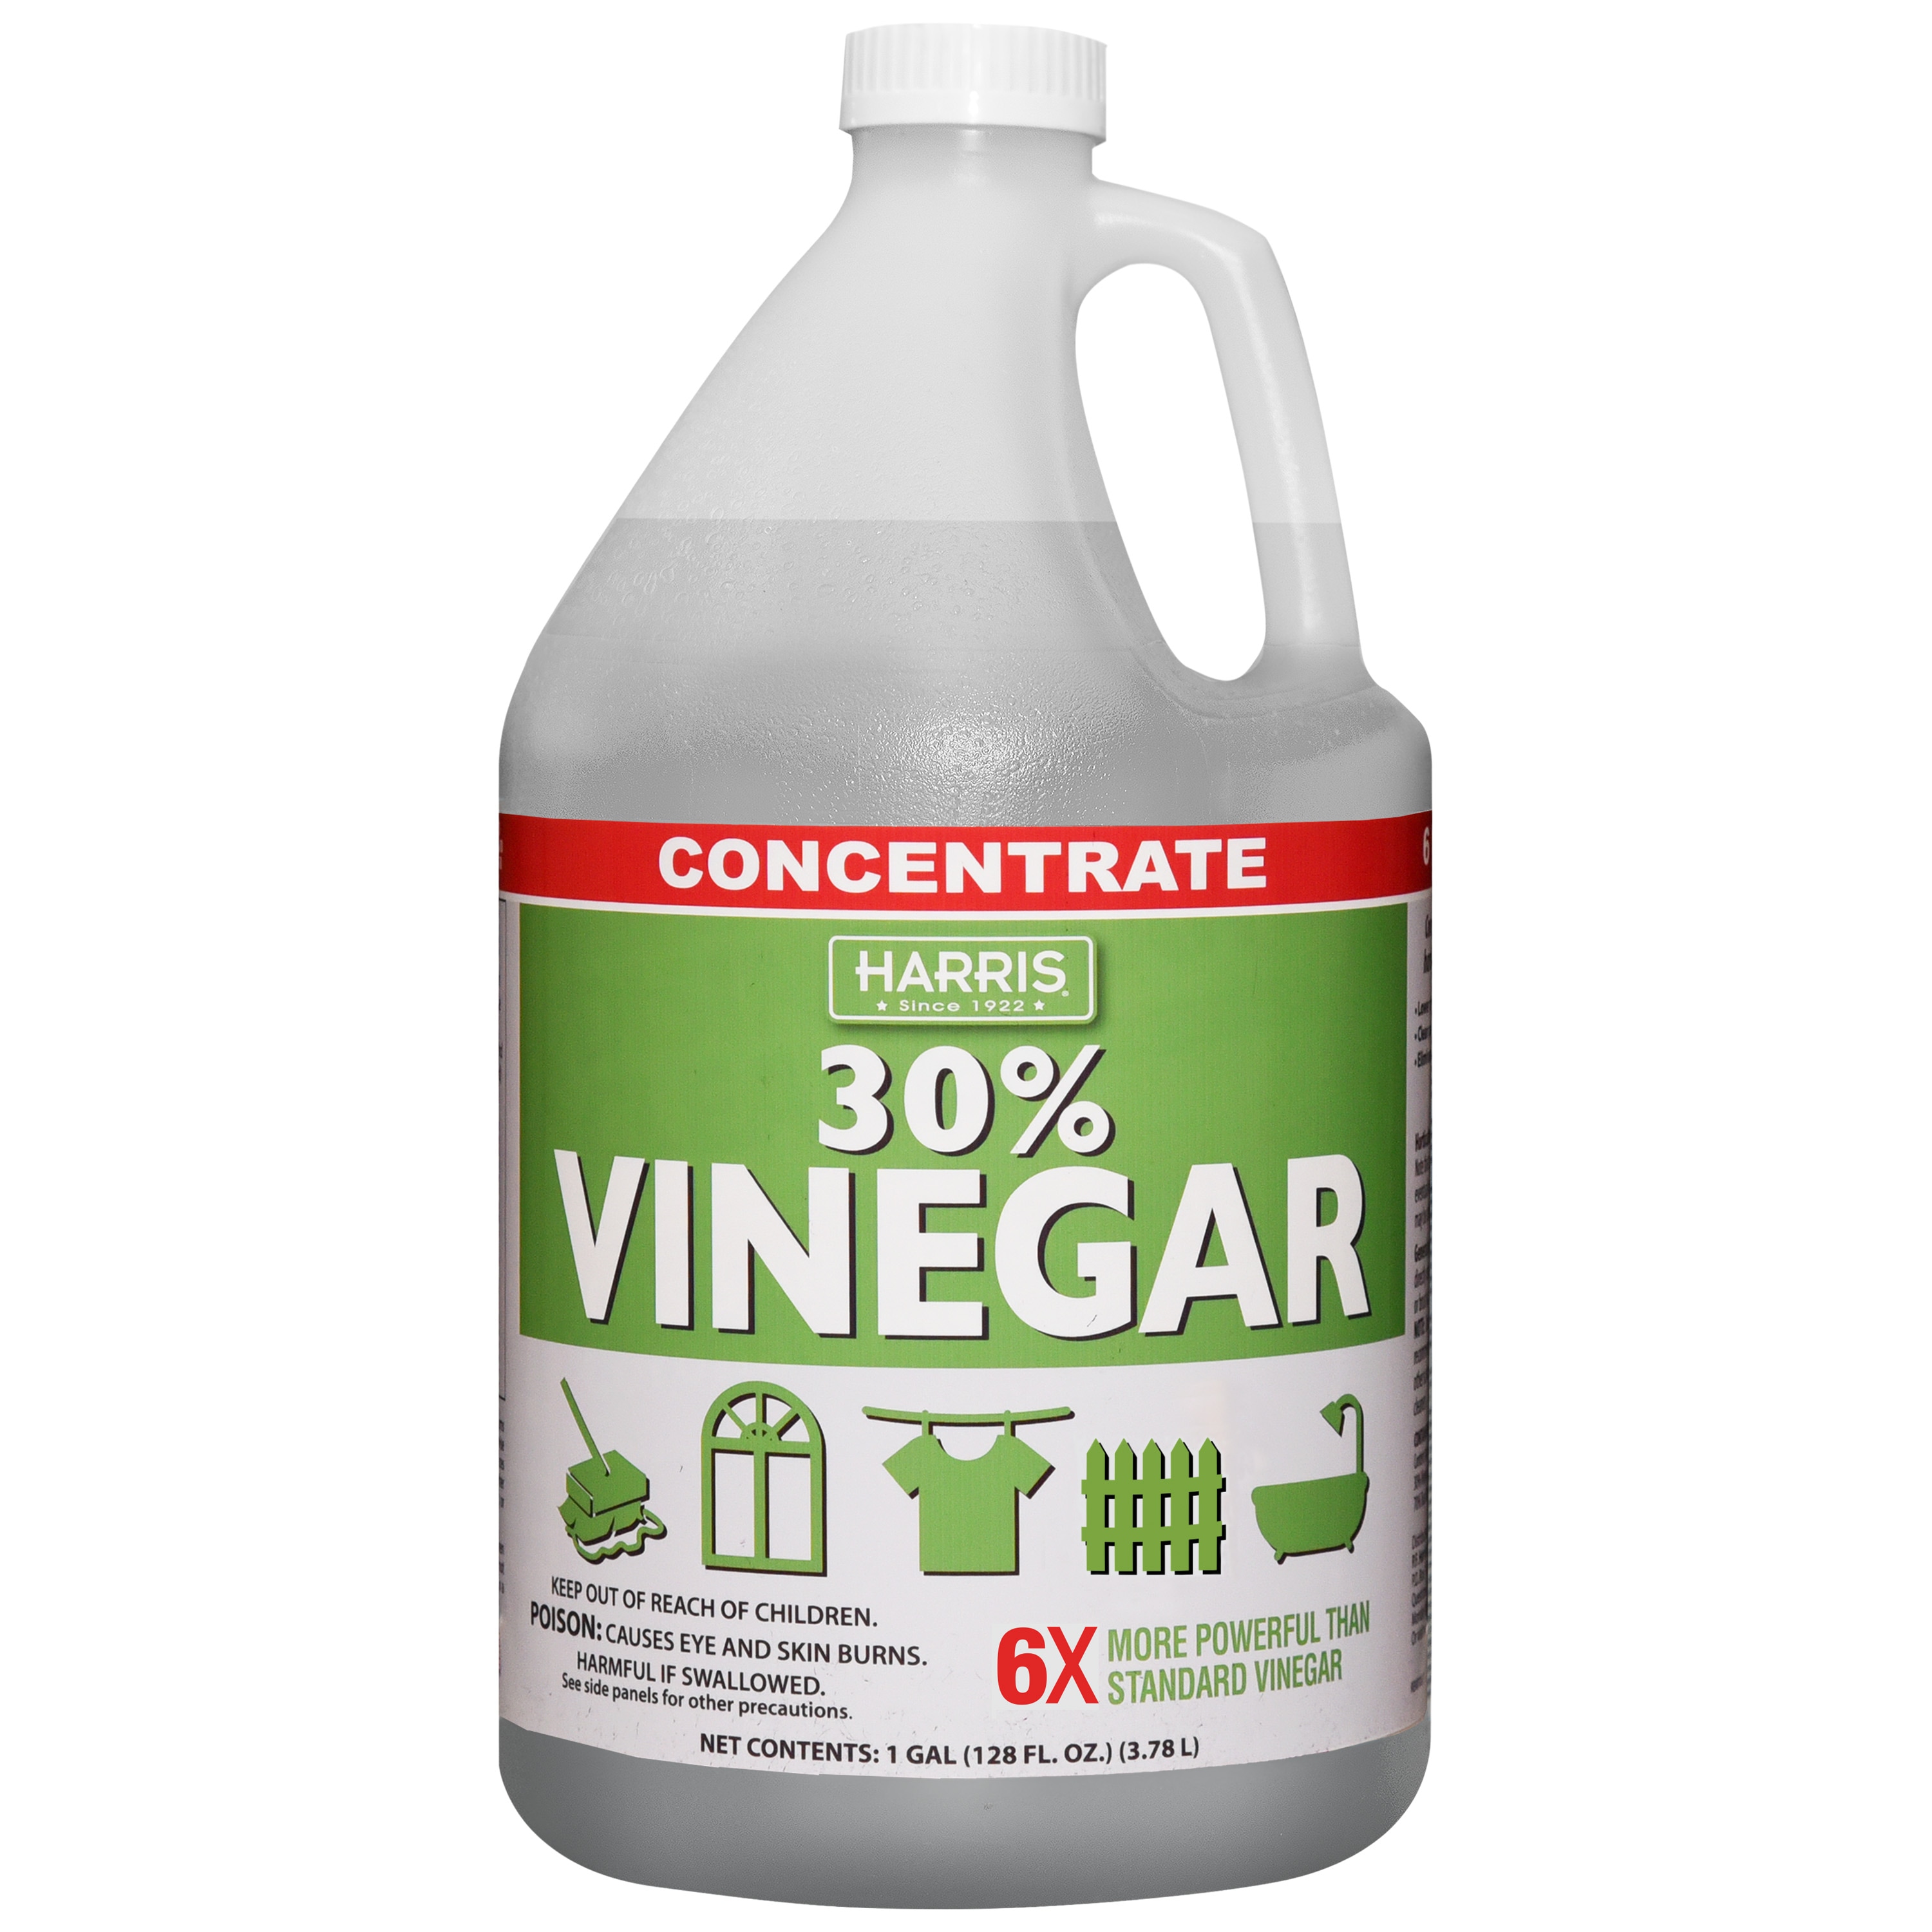 Ecos Window Cleaner, Vinegar, Plant Powered 22 Fl Oz, Glass Cleaners